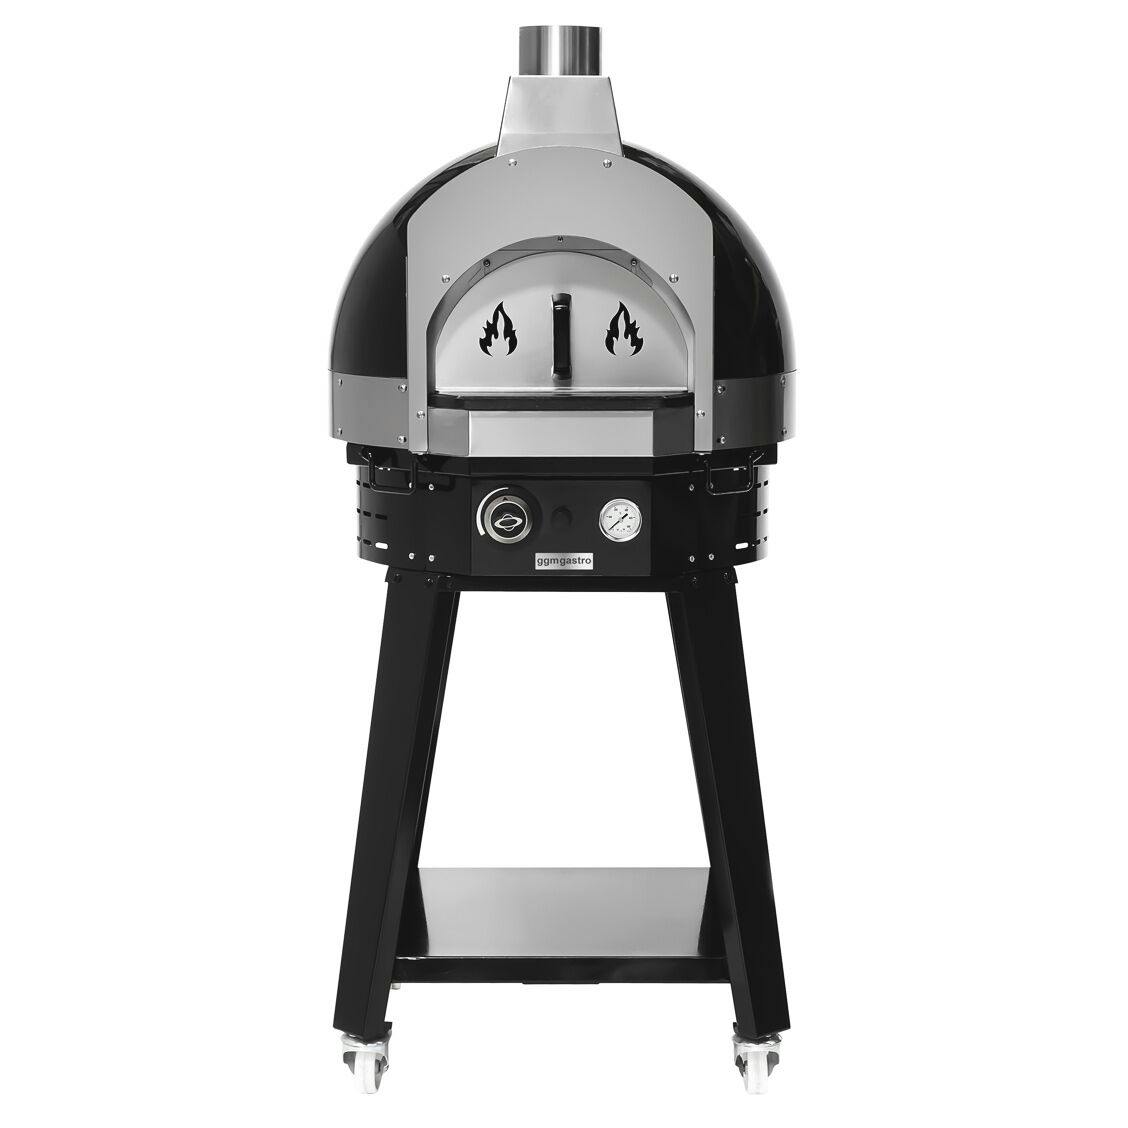 Gas Pizza Oven Black - Height: 0,83m - Manual - incl. base frame